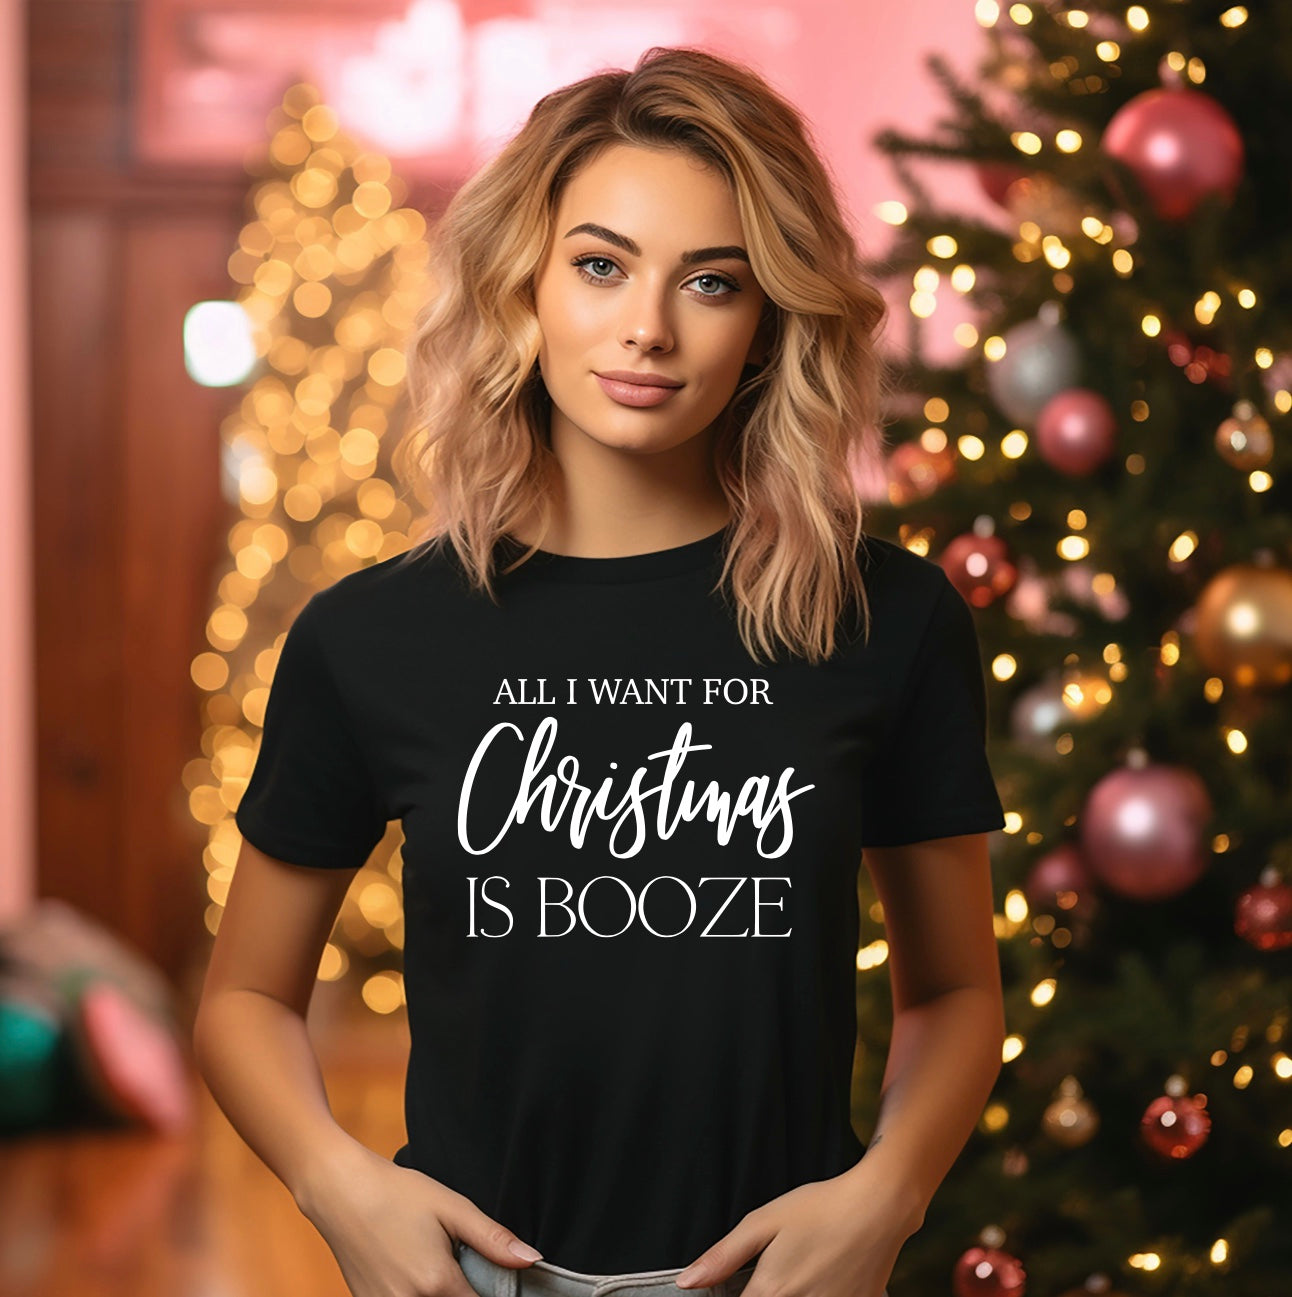 All I Want for Christmas is Booze t-shirt In black